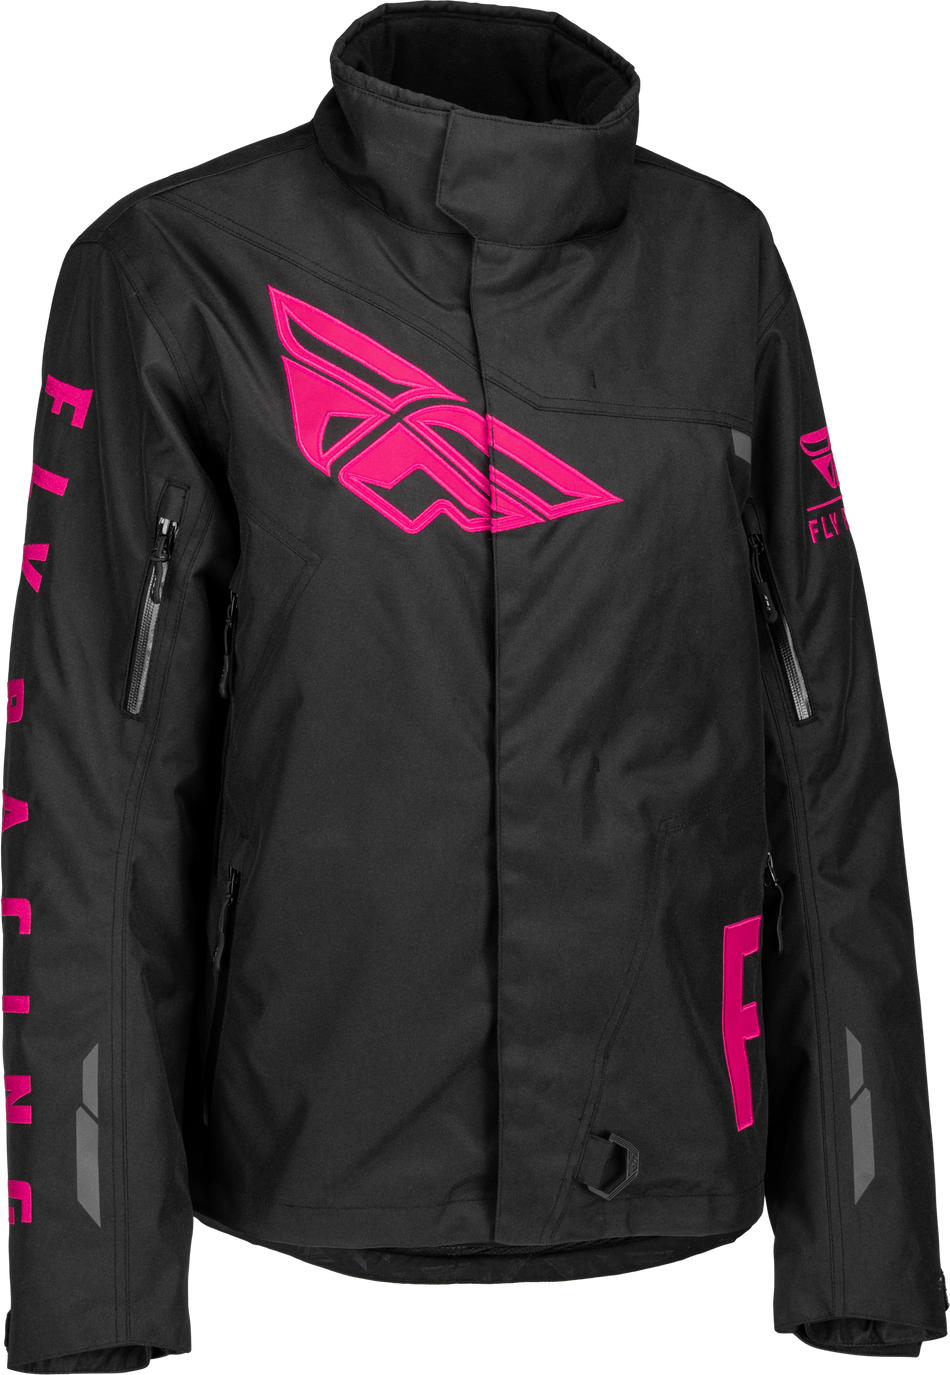 FLY RACING Women's Snx Pro Jacket Black/Pink Md 470-4512M